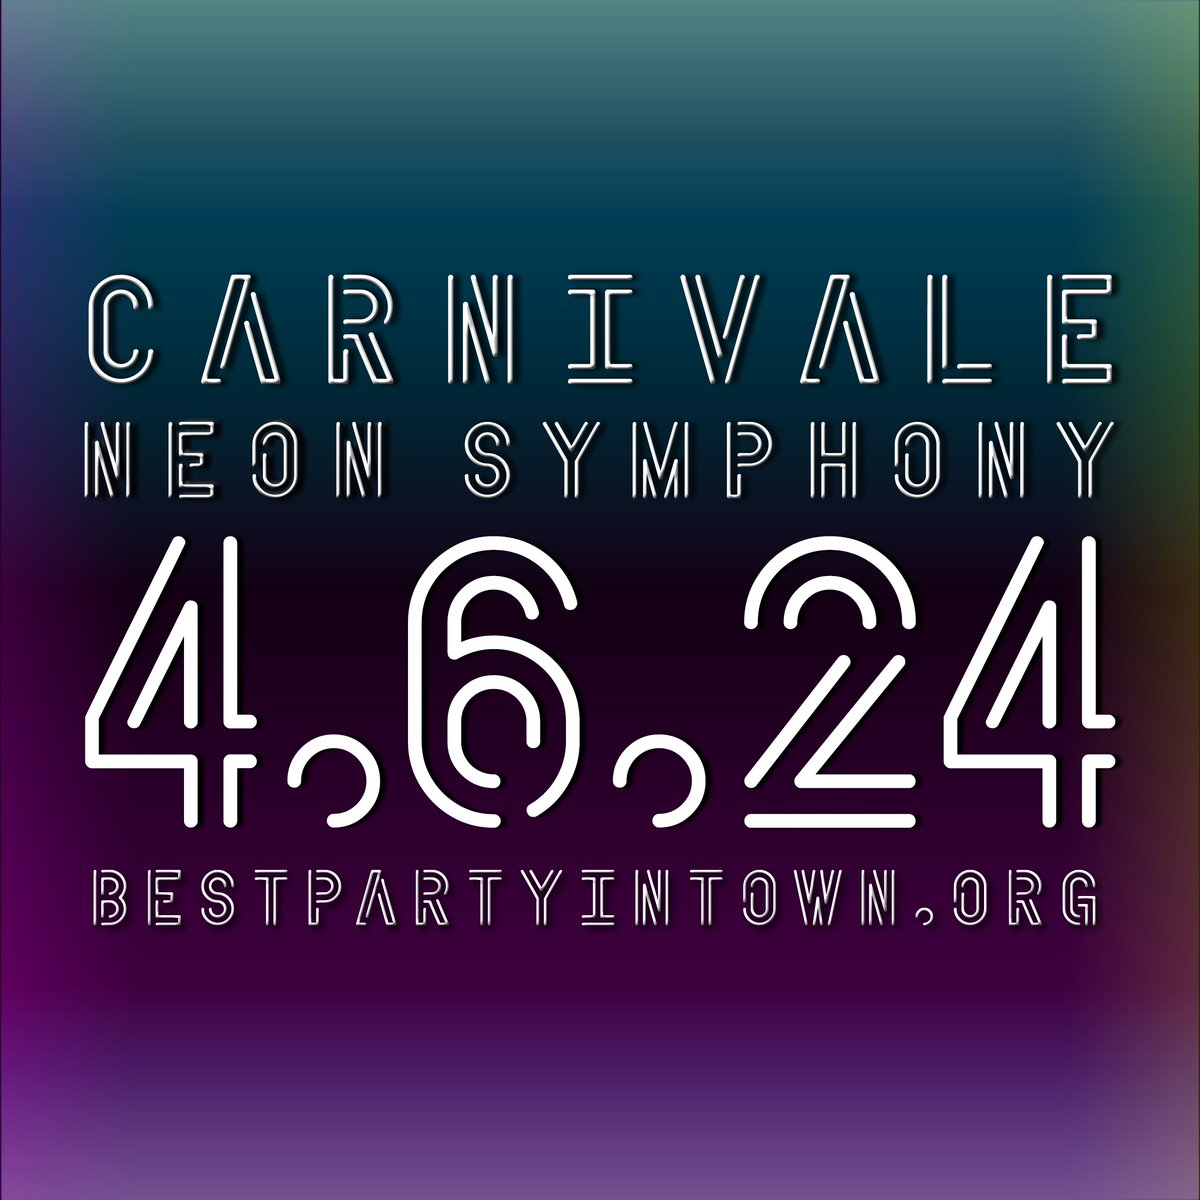 We are thrilled to partner with so many organizations who are committed to the betterment of our community. Join the neon fun by sponsoring Carnivale 2024. ow.ly/vQ3J50QFjKl #housinghealingwholeness #carnivale2024 #endhomelessness #neonsymphony